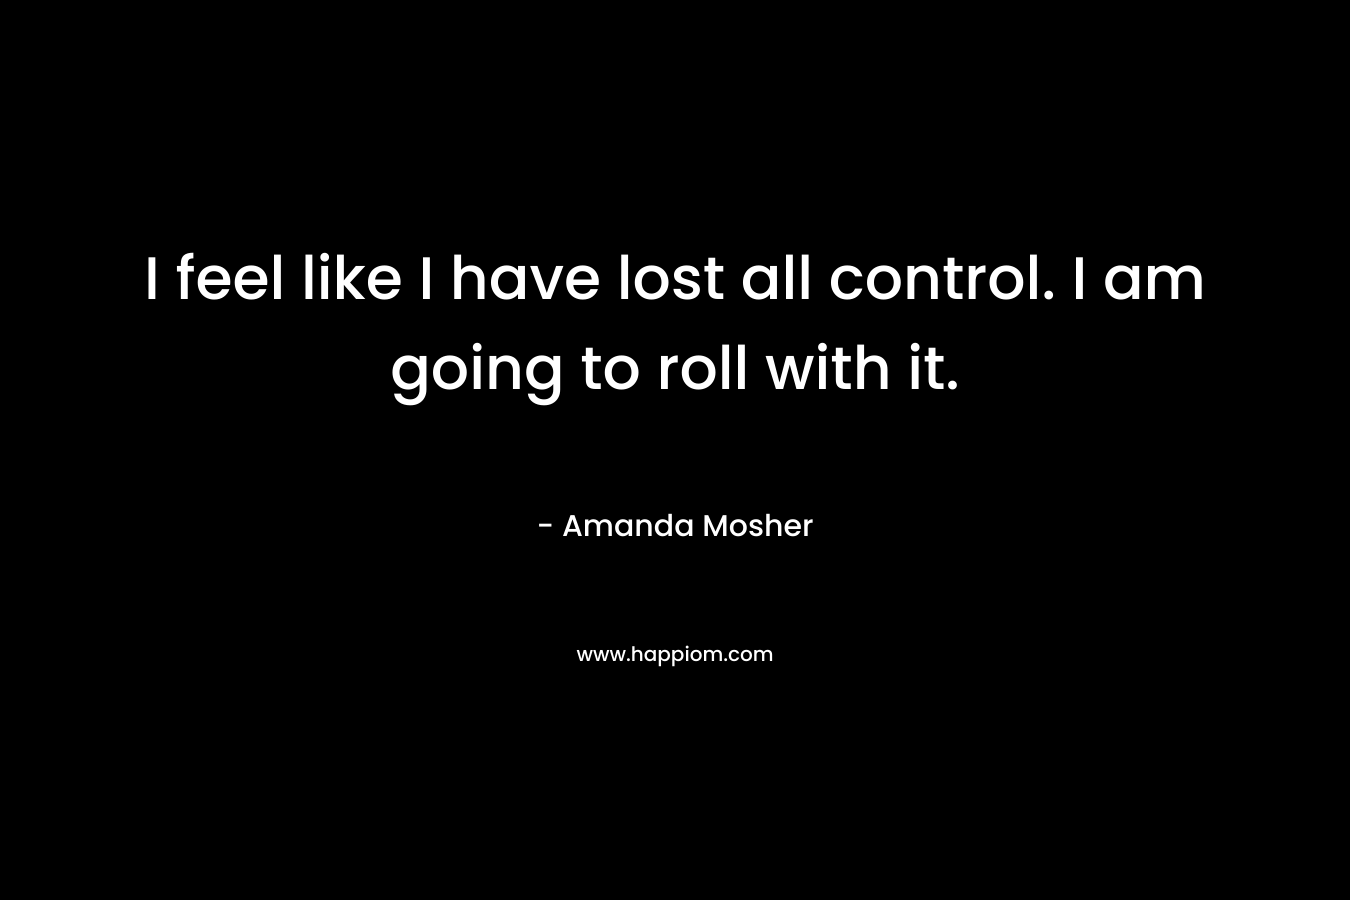 I feel like I have lost all control. I am going to roll with it. – Amanda Mosher